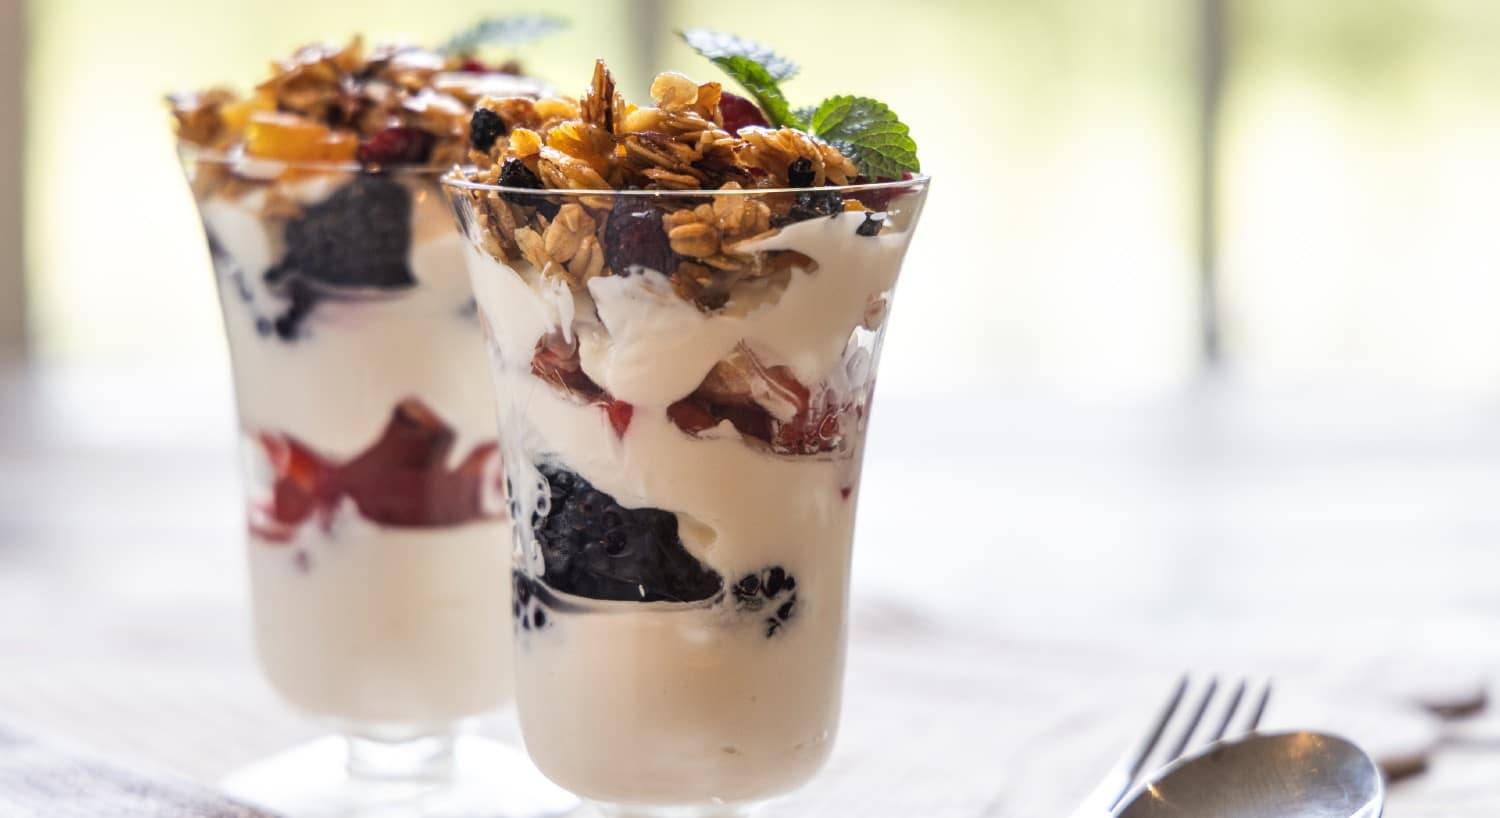 Two glass parfaits cups of yogurt, berries, granola and sprig of mint